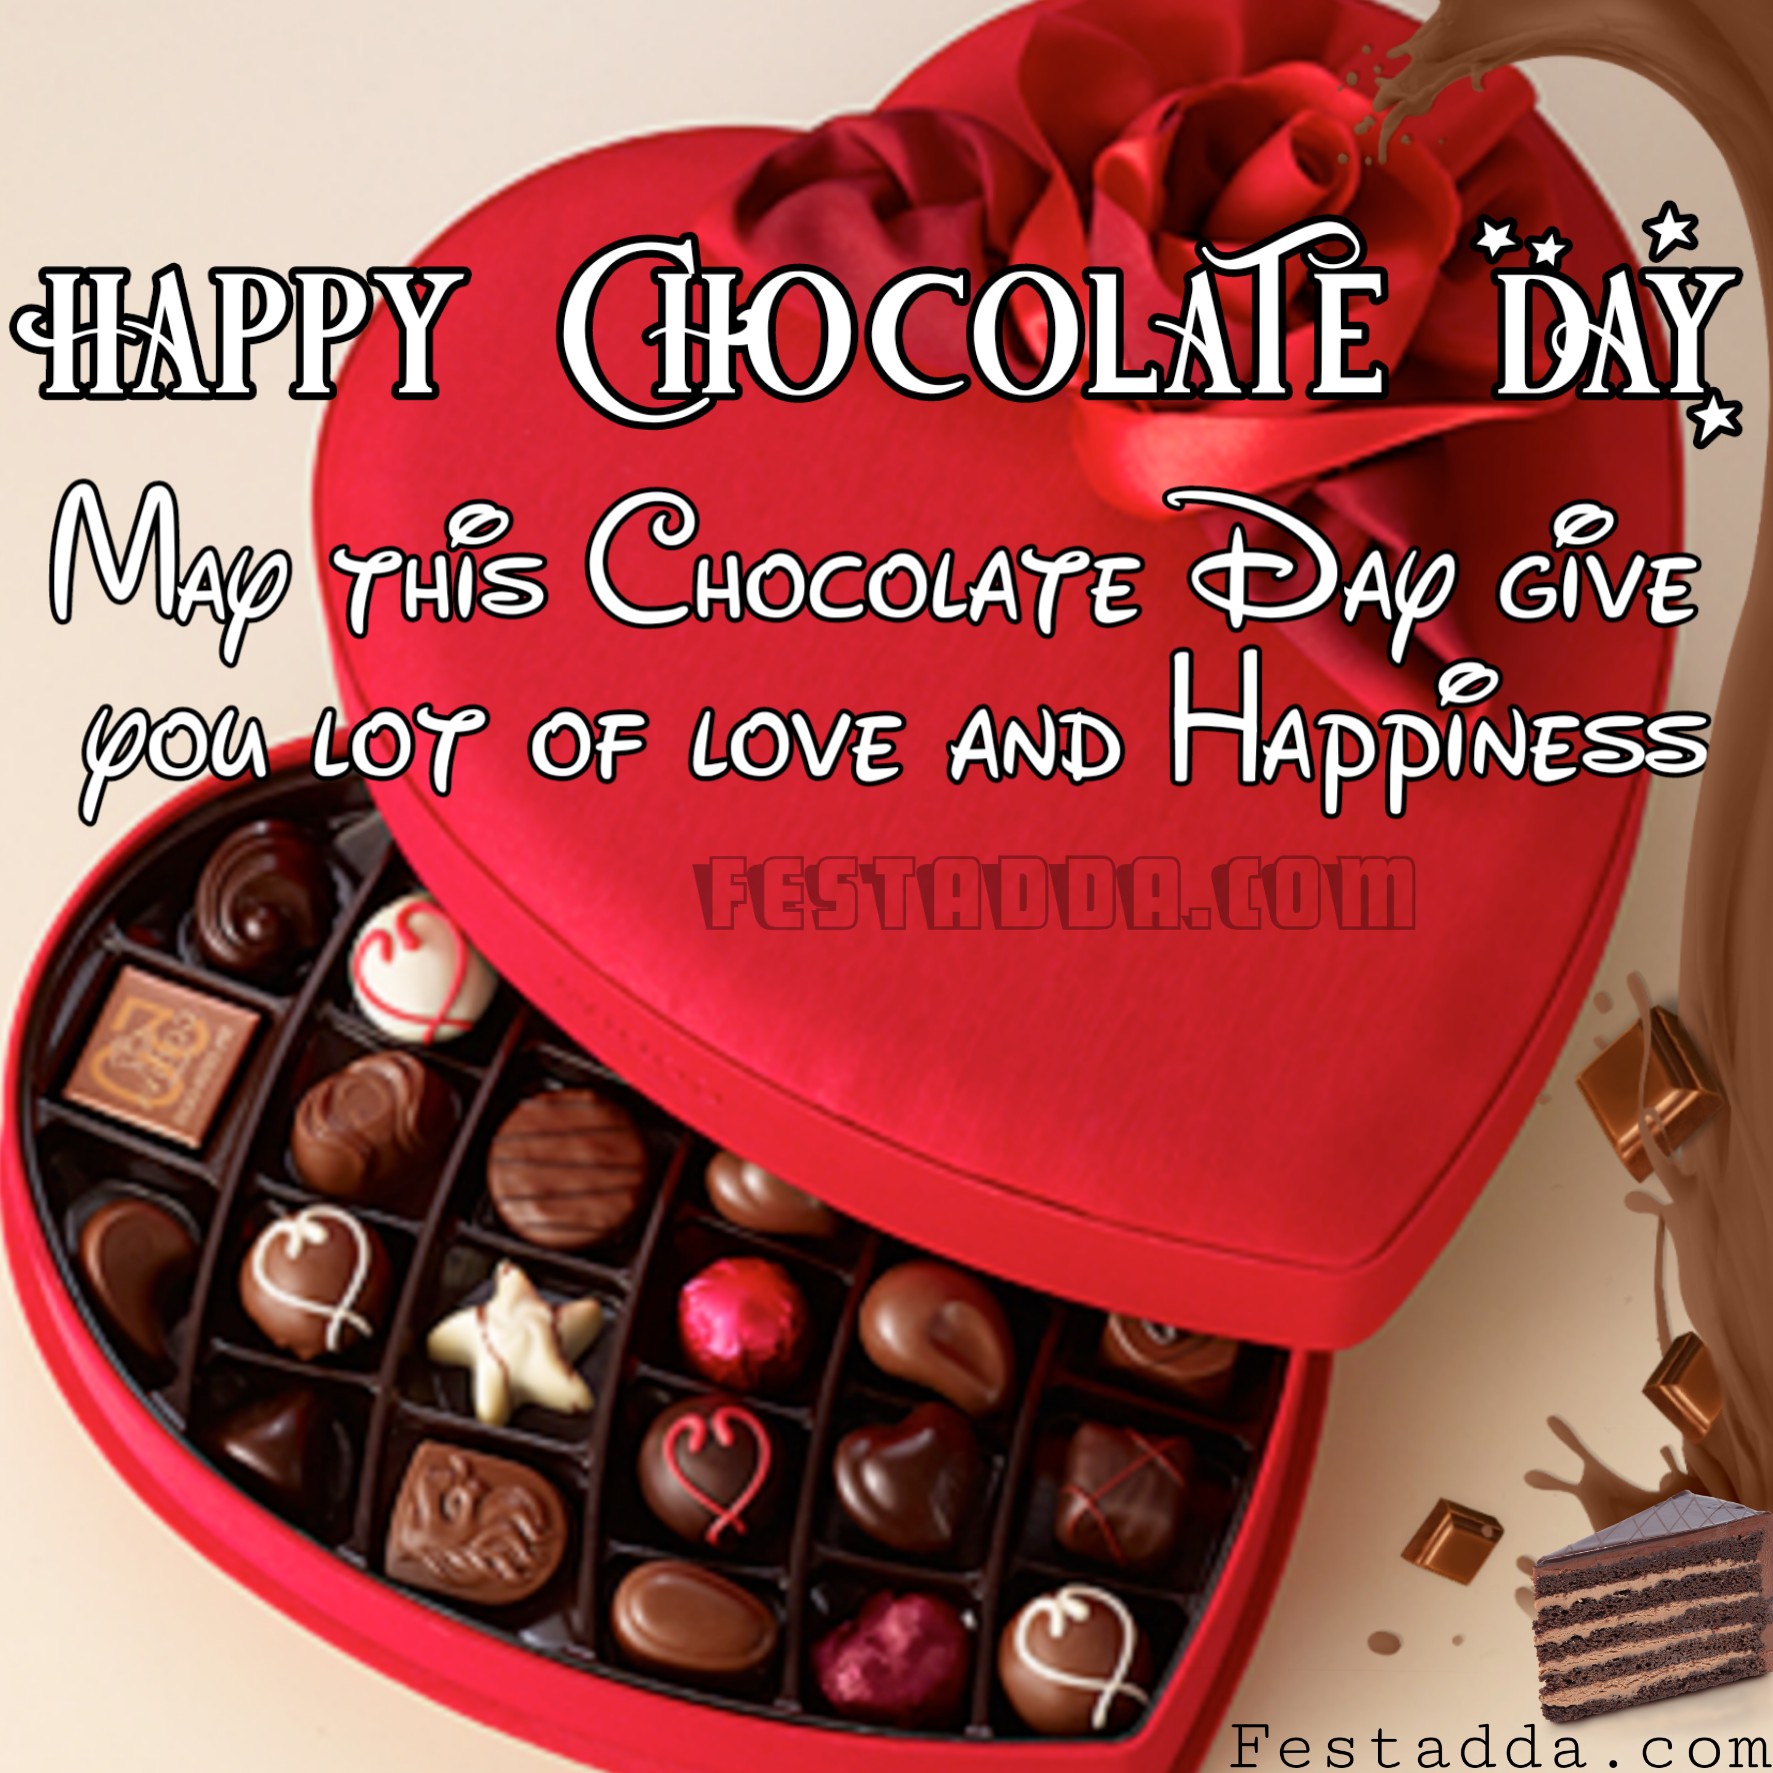 Happy Chocolate Day 2019 Images - Chocolate Day Images Download , HD Wallpaper & Backgrounds